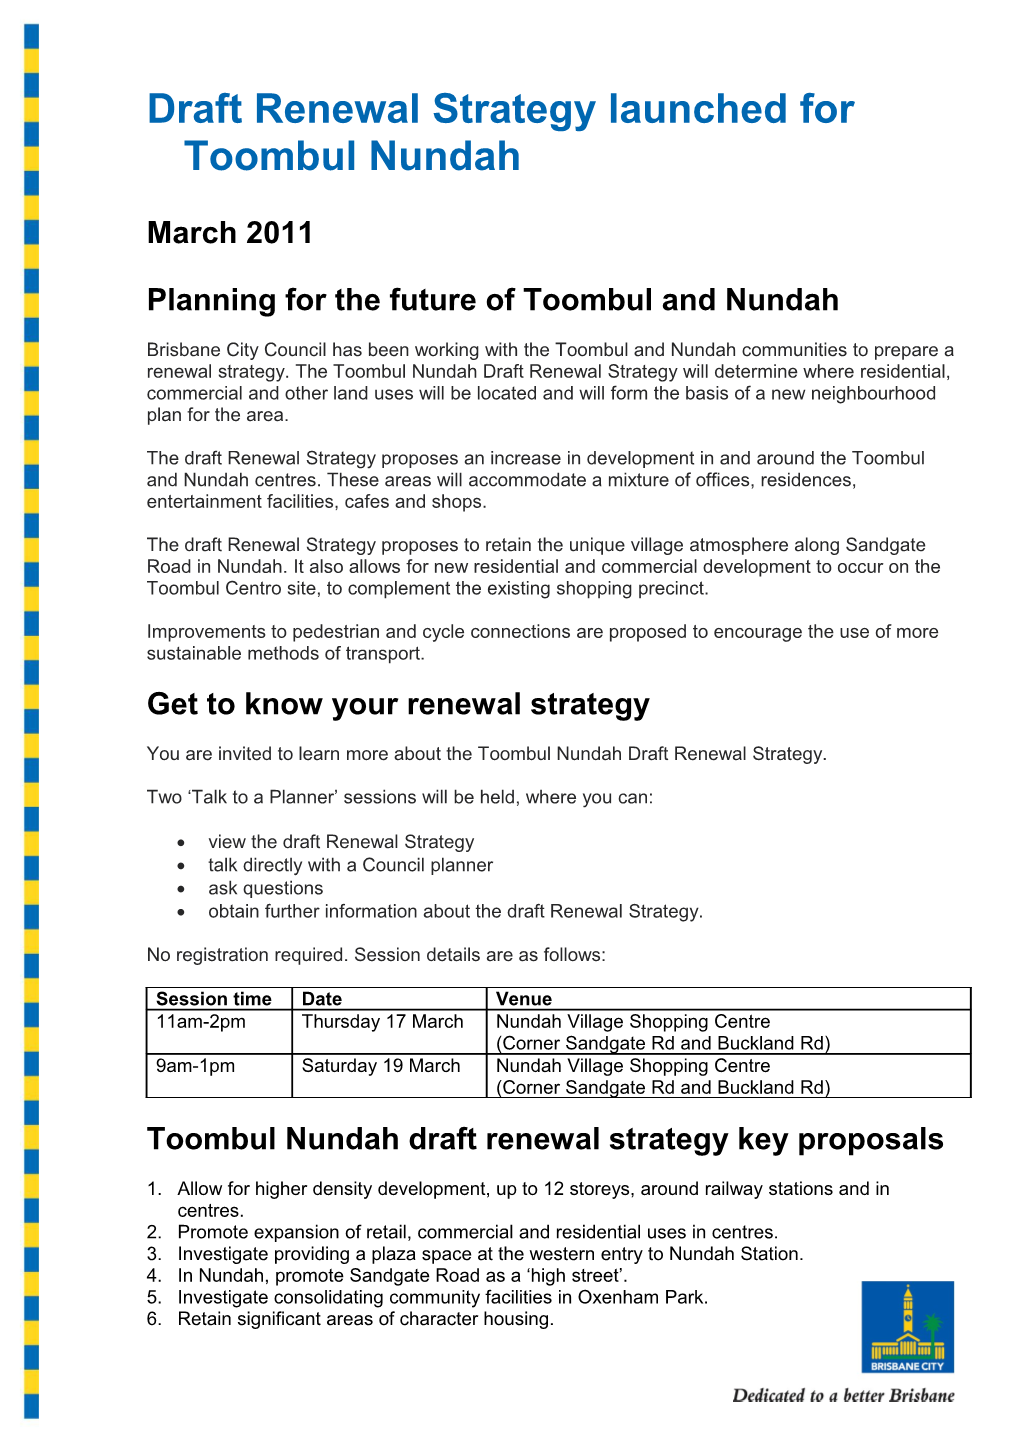 Draft Renewal Strategy Launched for Toombul Nundah